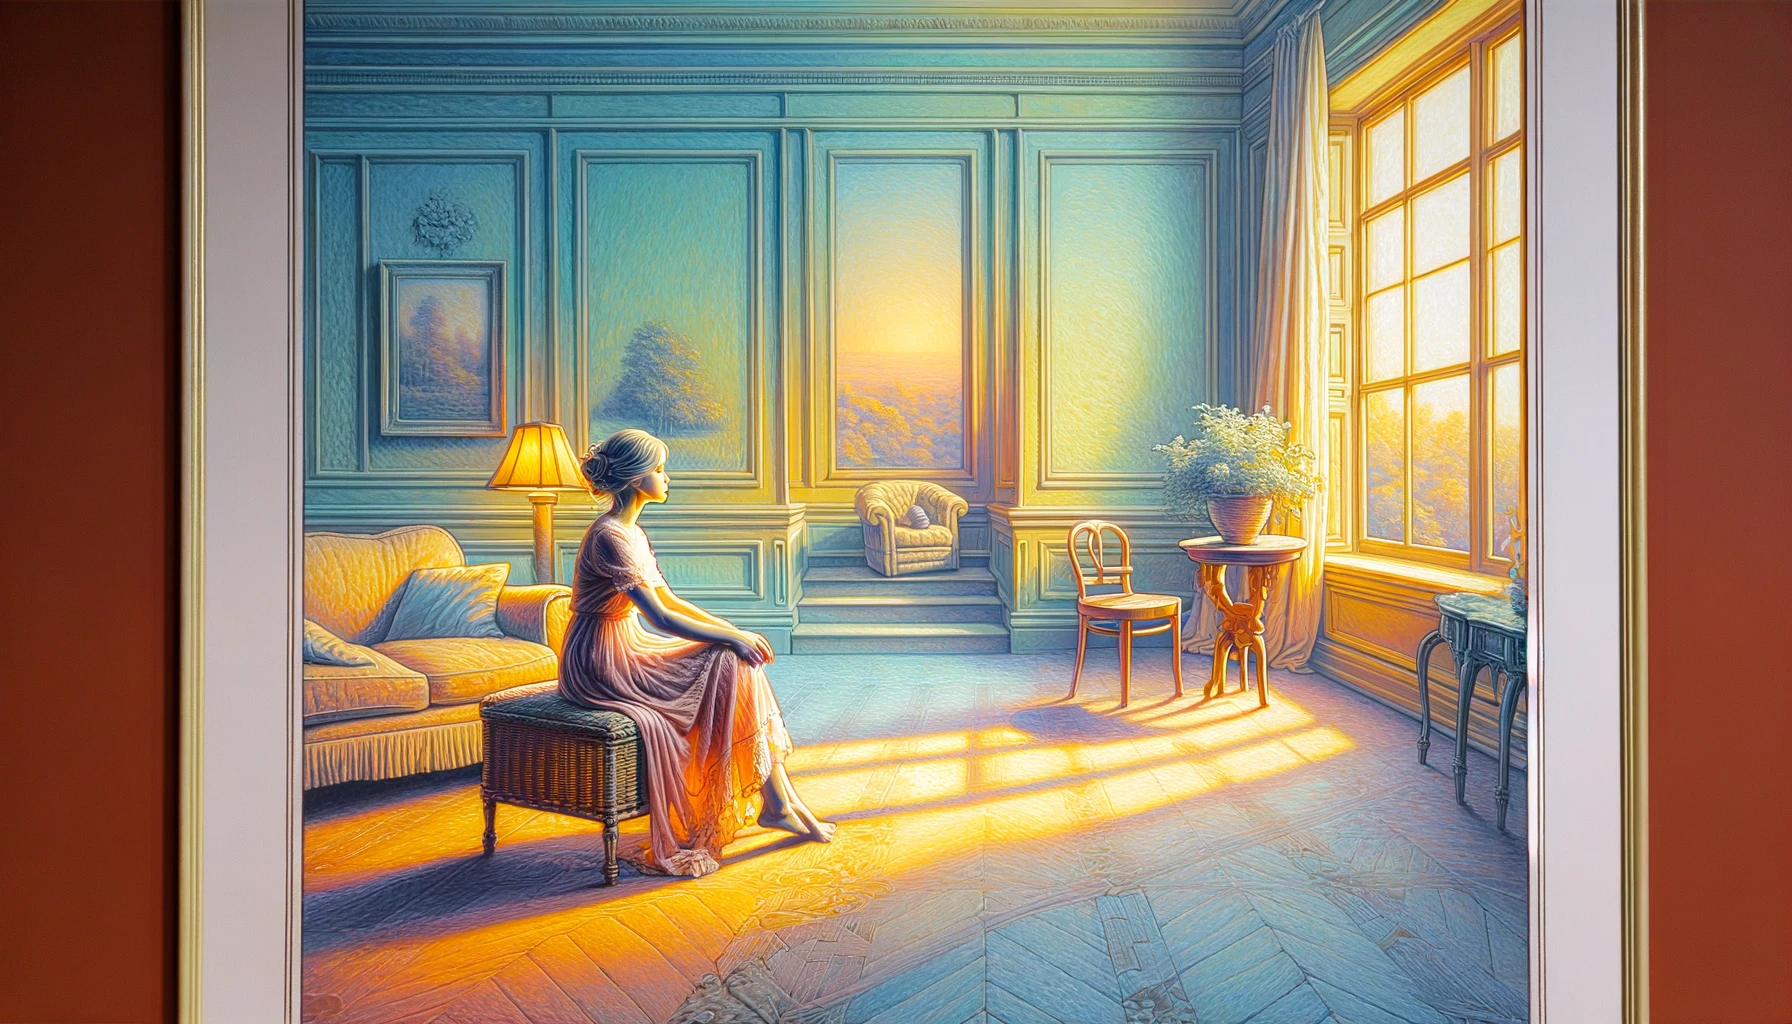 "Serene woman in colorful sitting room, trusted psychic contemplating future insights"